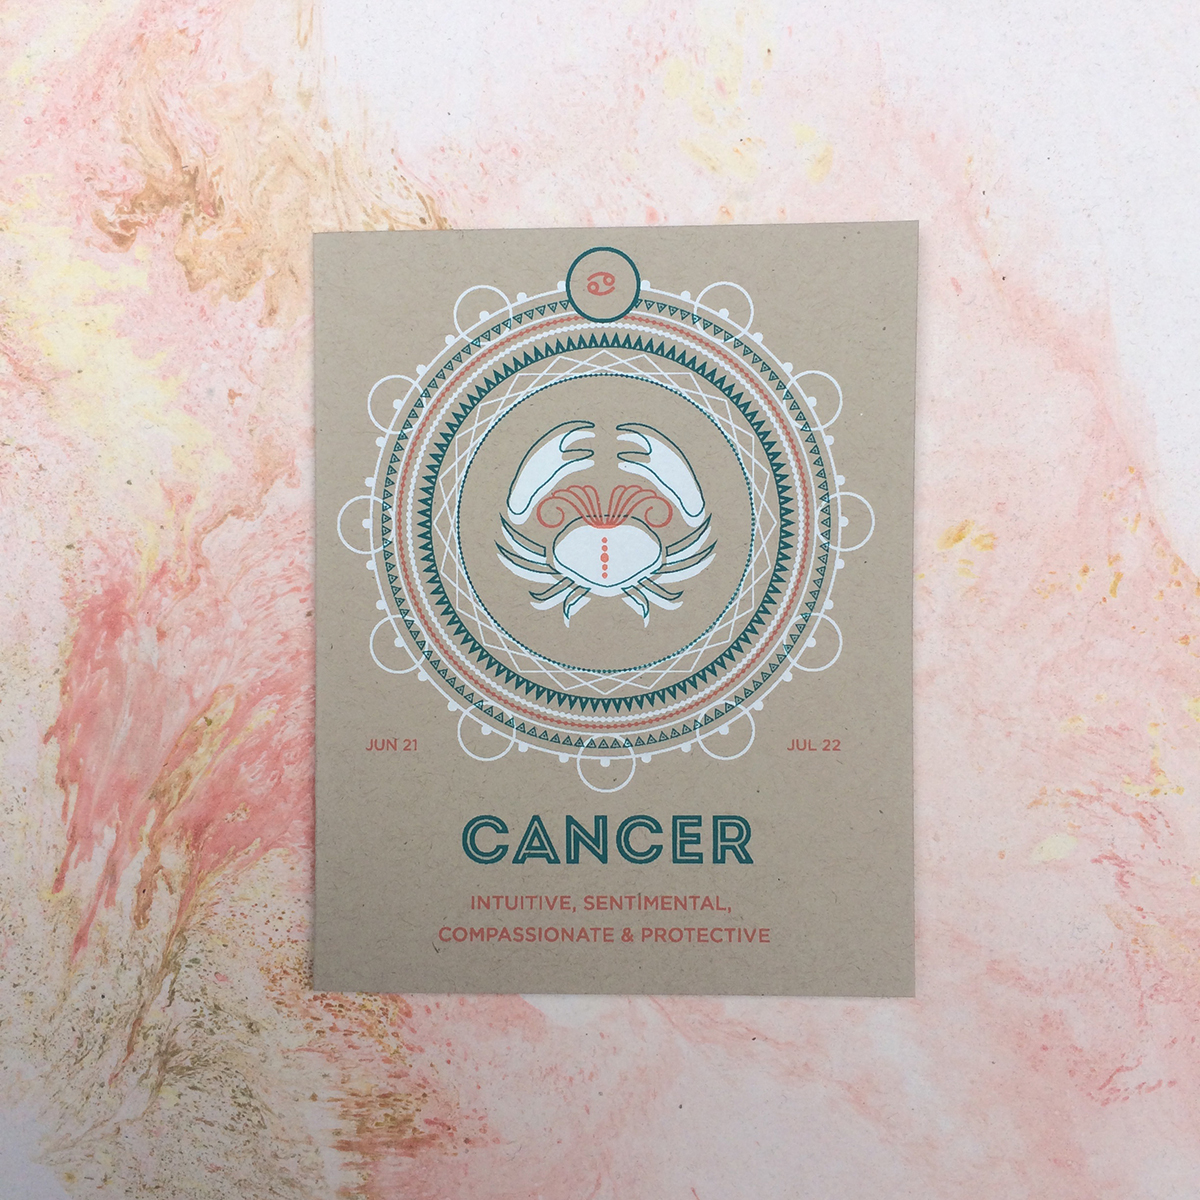 Cancer Greeting Card